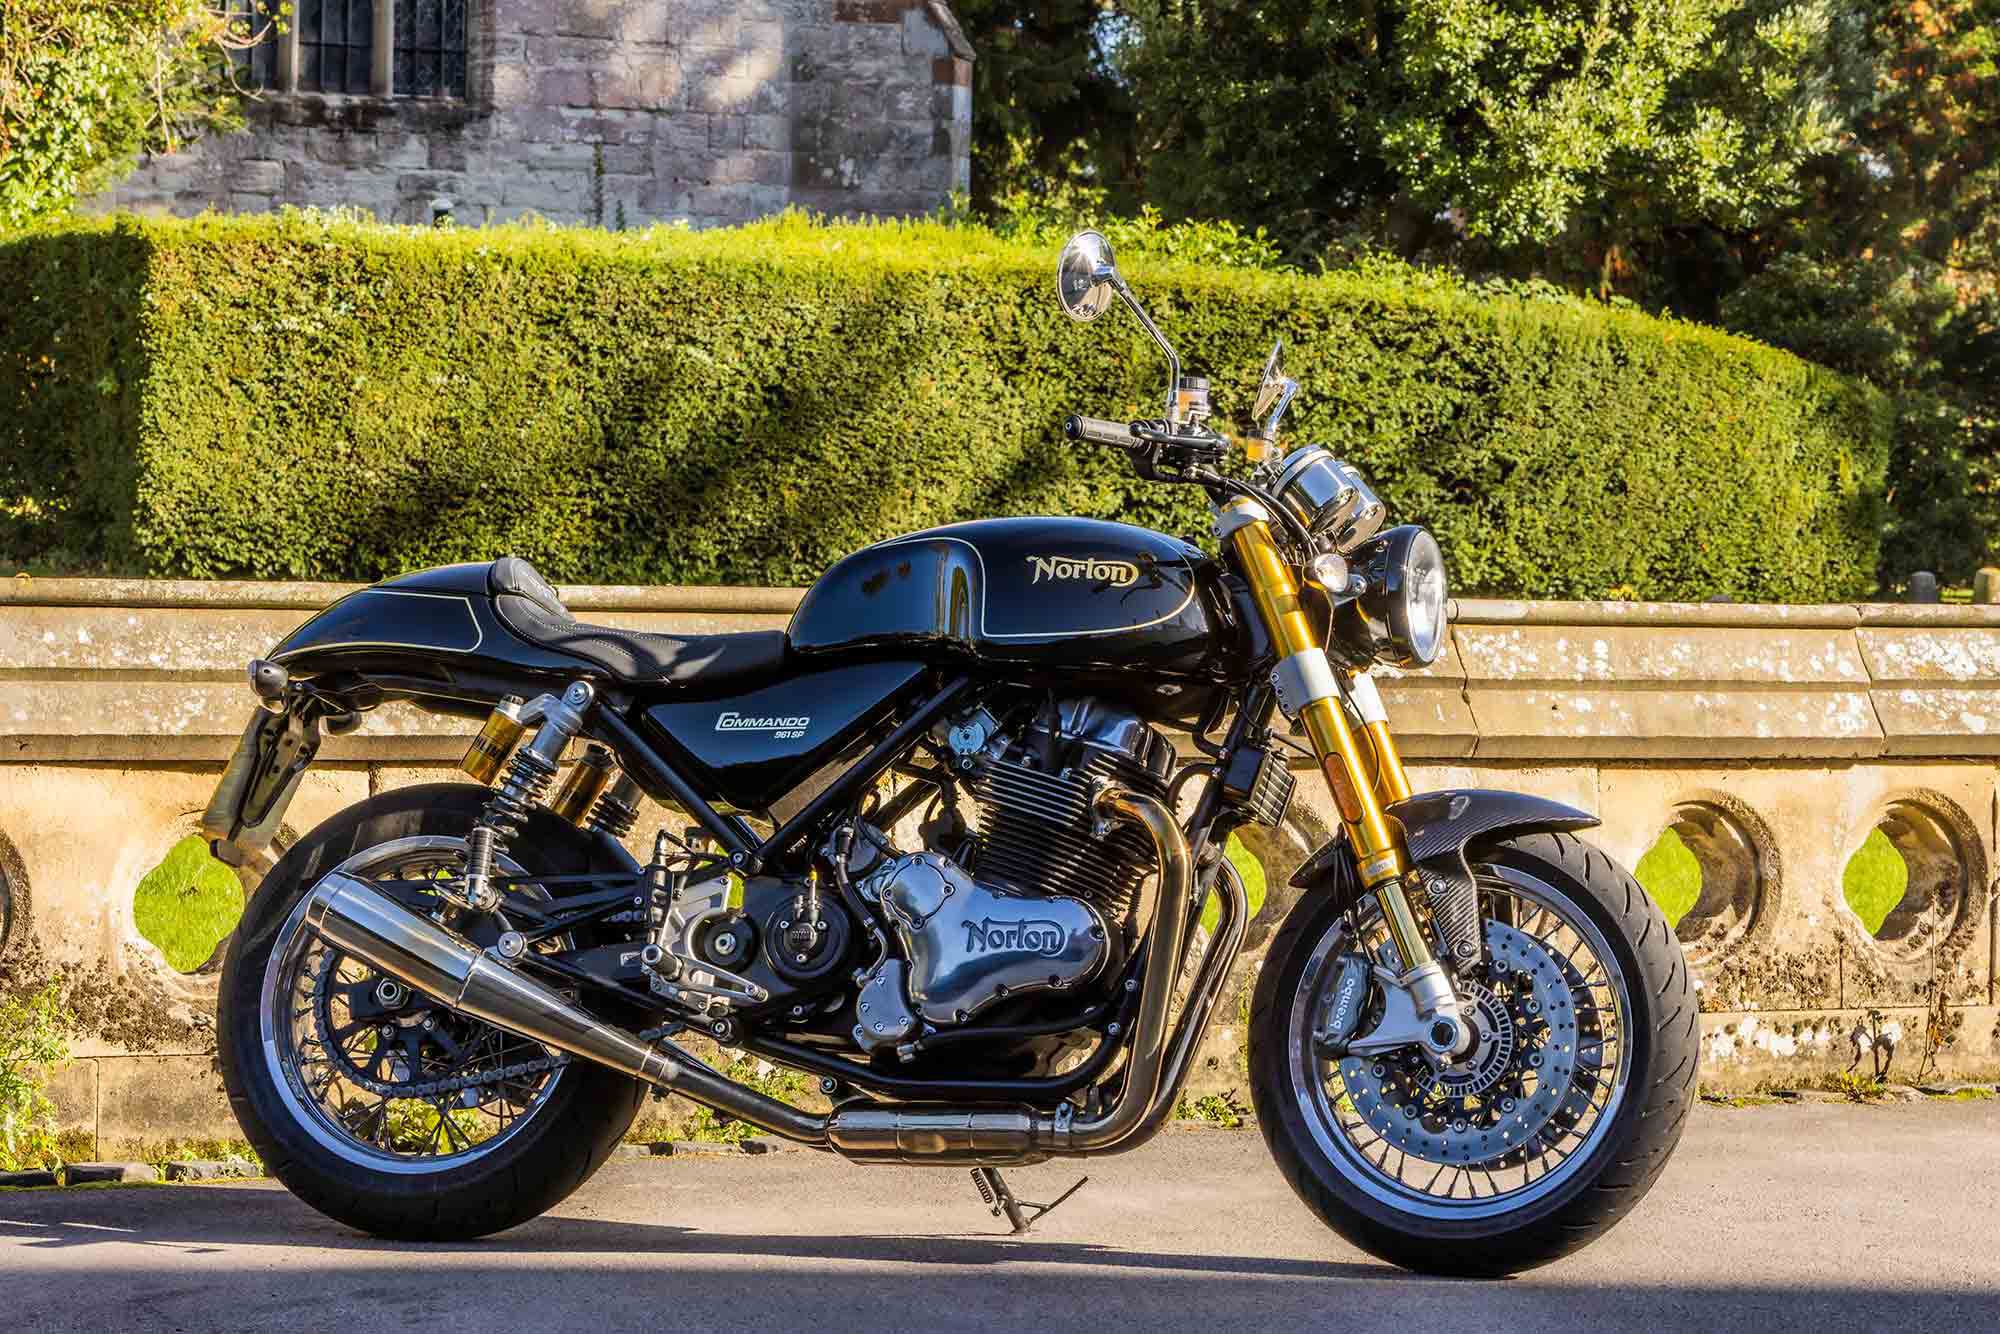 TVS Motors has invested 100 million pounds sterling into “new” Norton; the Commando has received extensive track, endurance, and rig testing to prove its reliability.